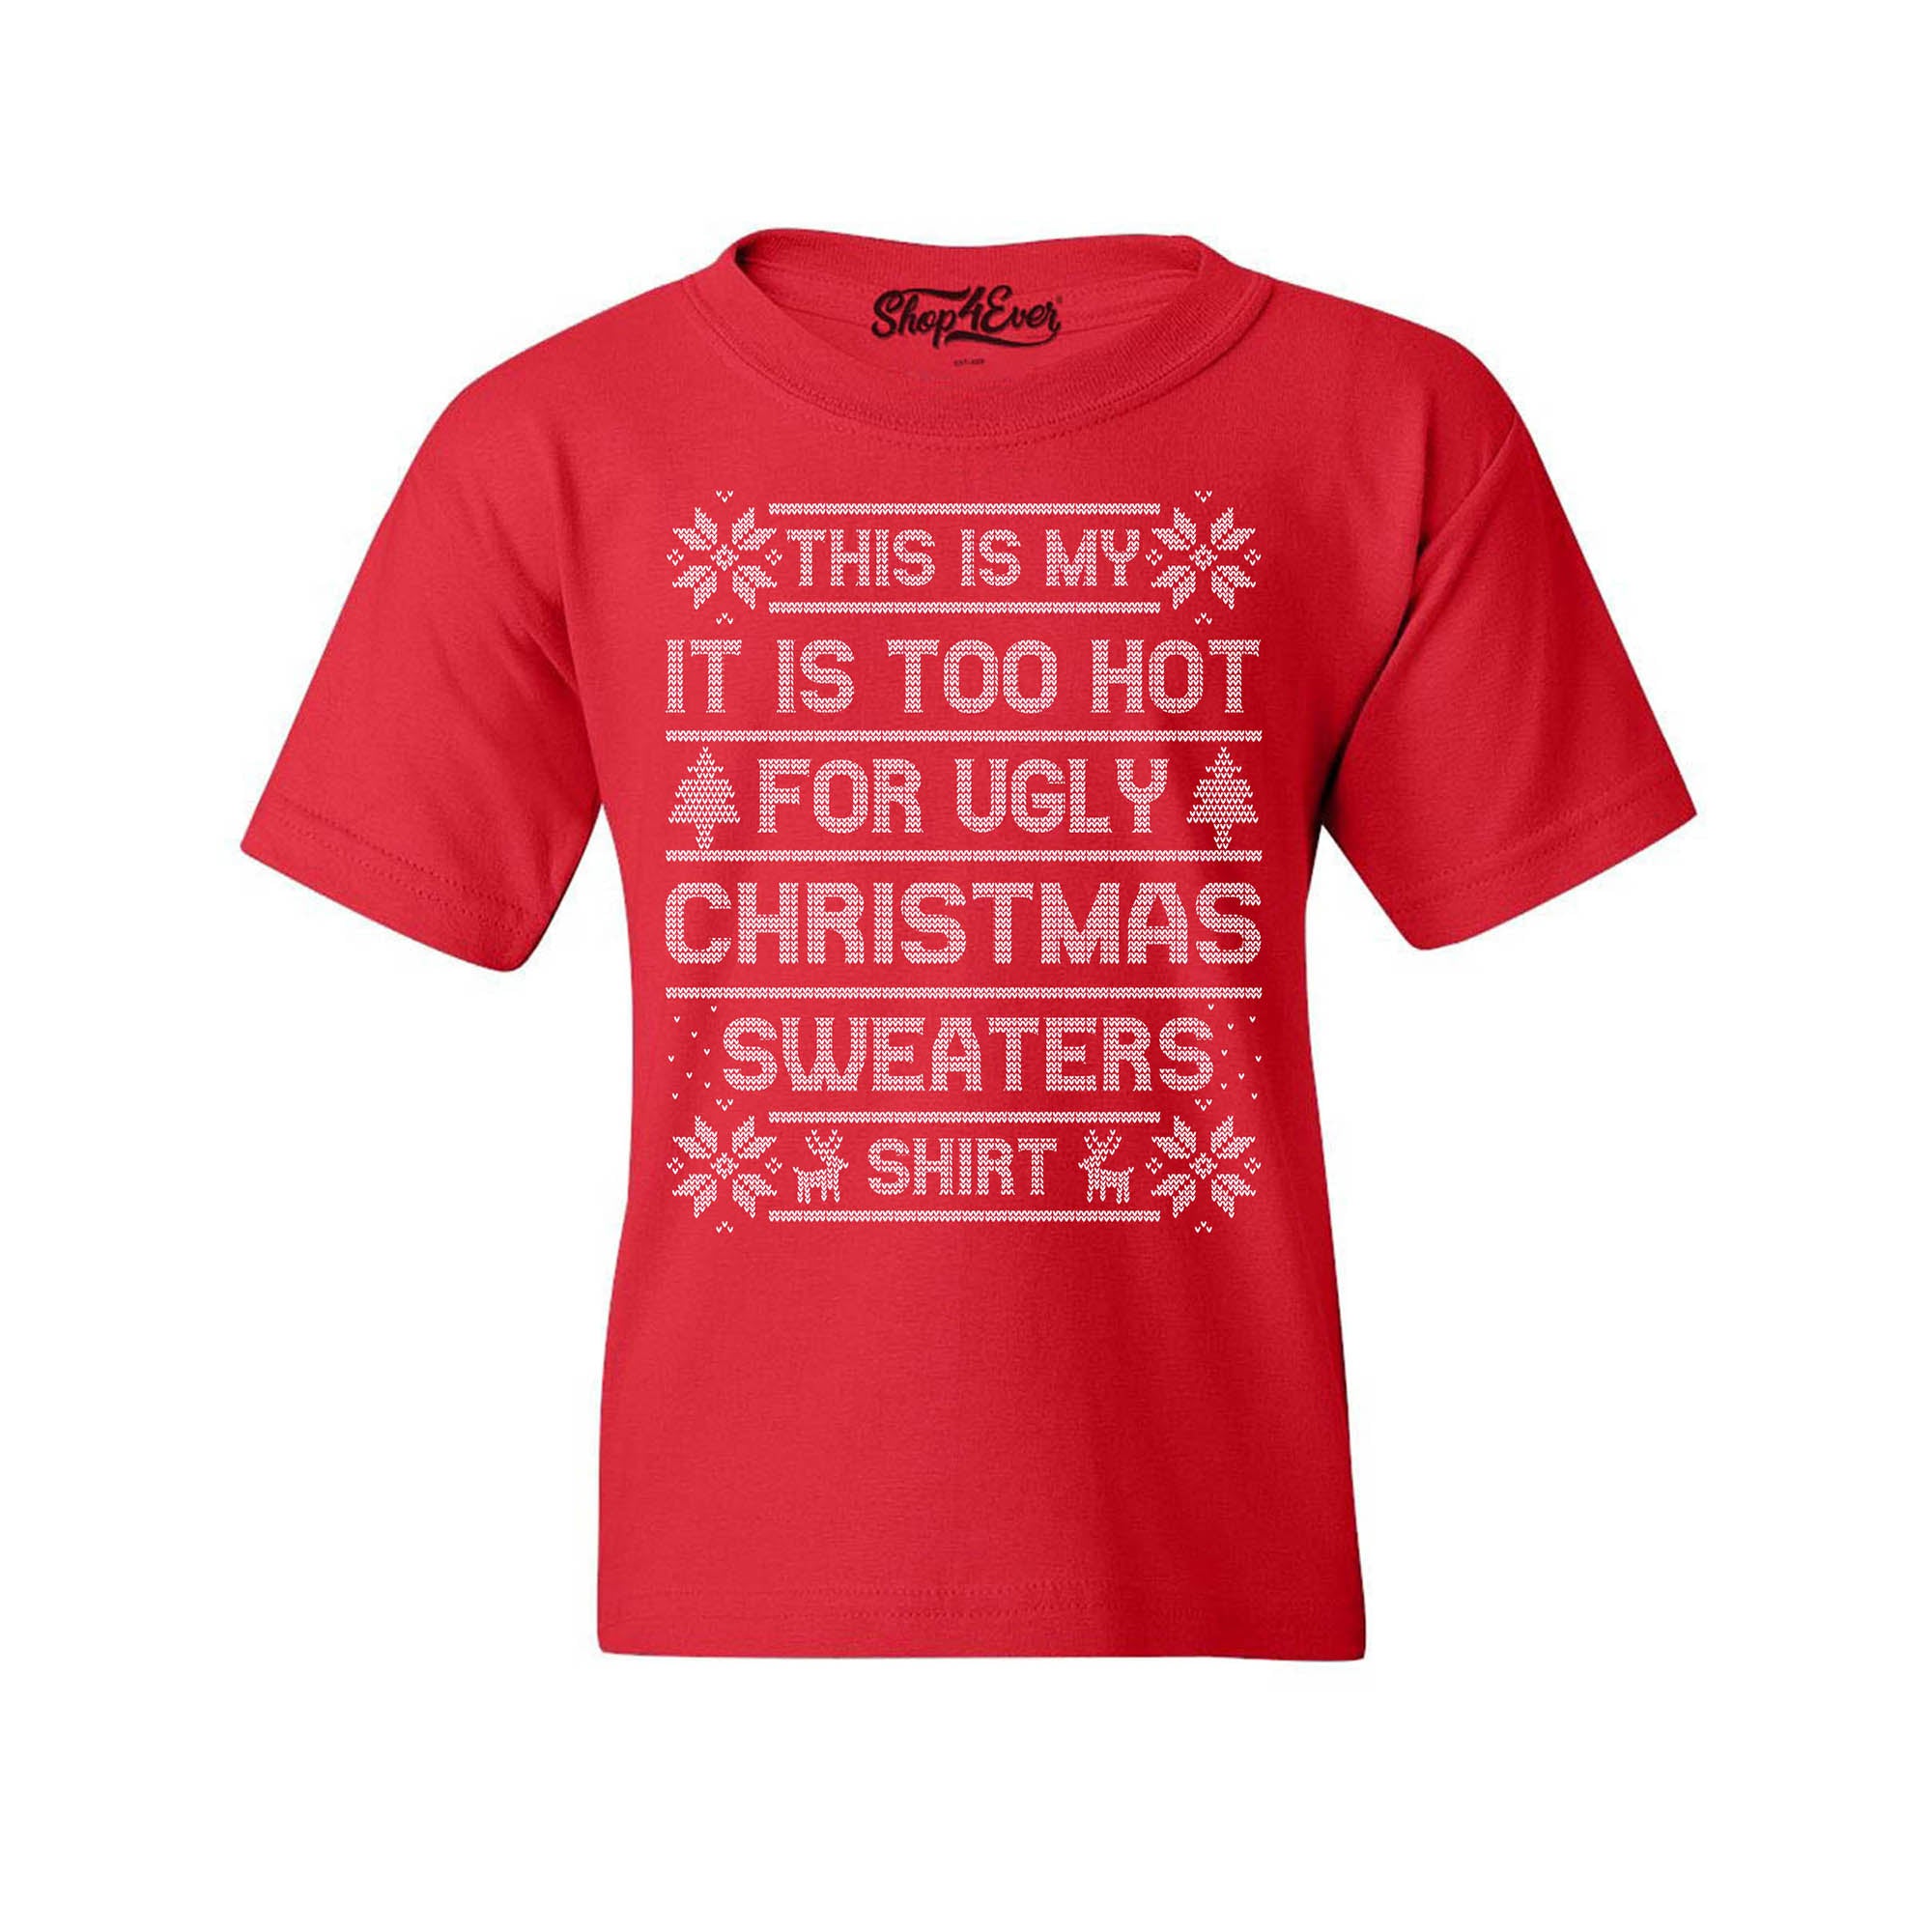 This is My It's Too Hot for Ugly Christmas Sweaters Shirt Youth's T-Shirt